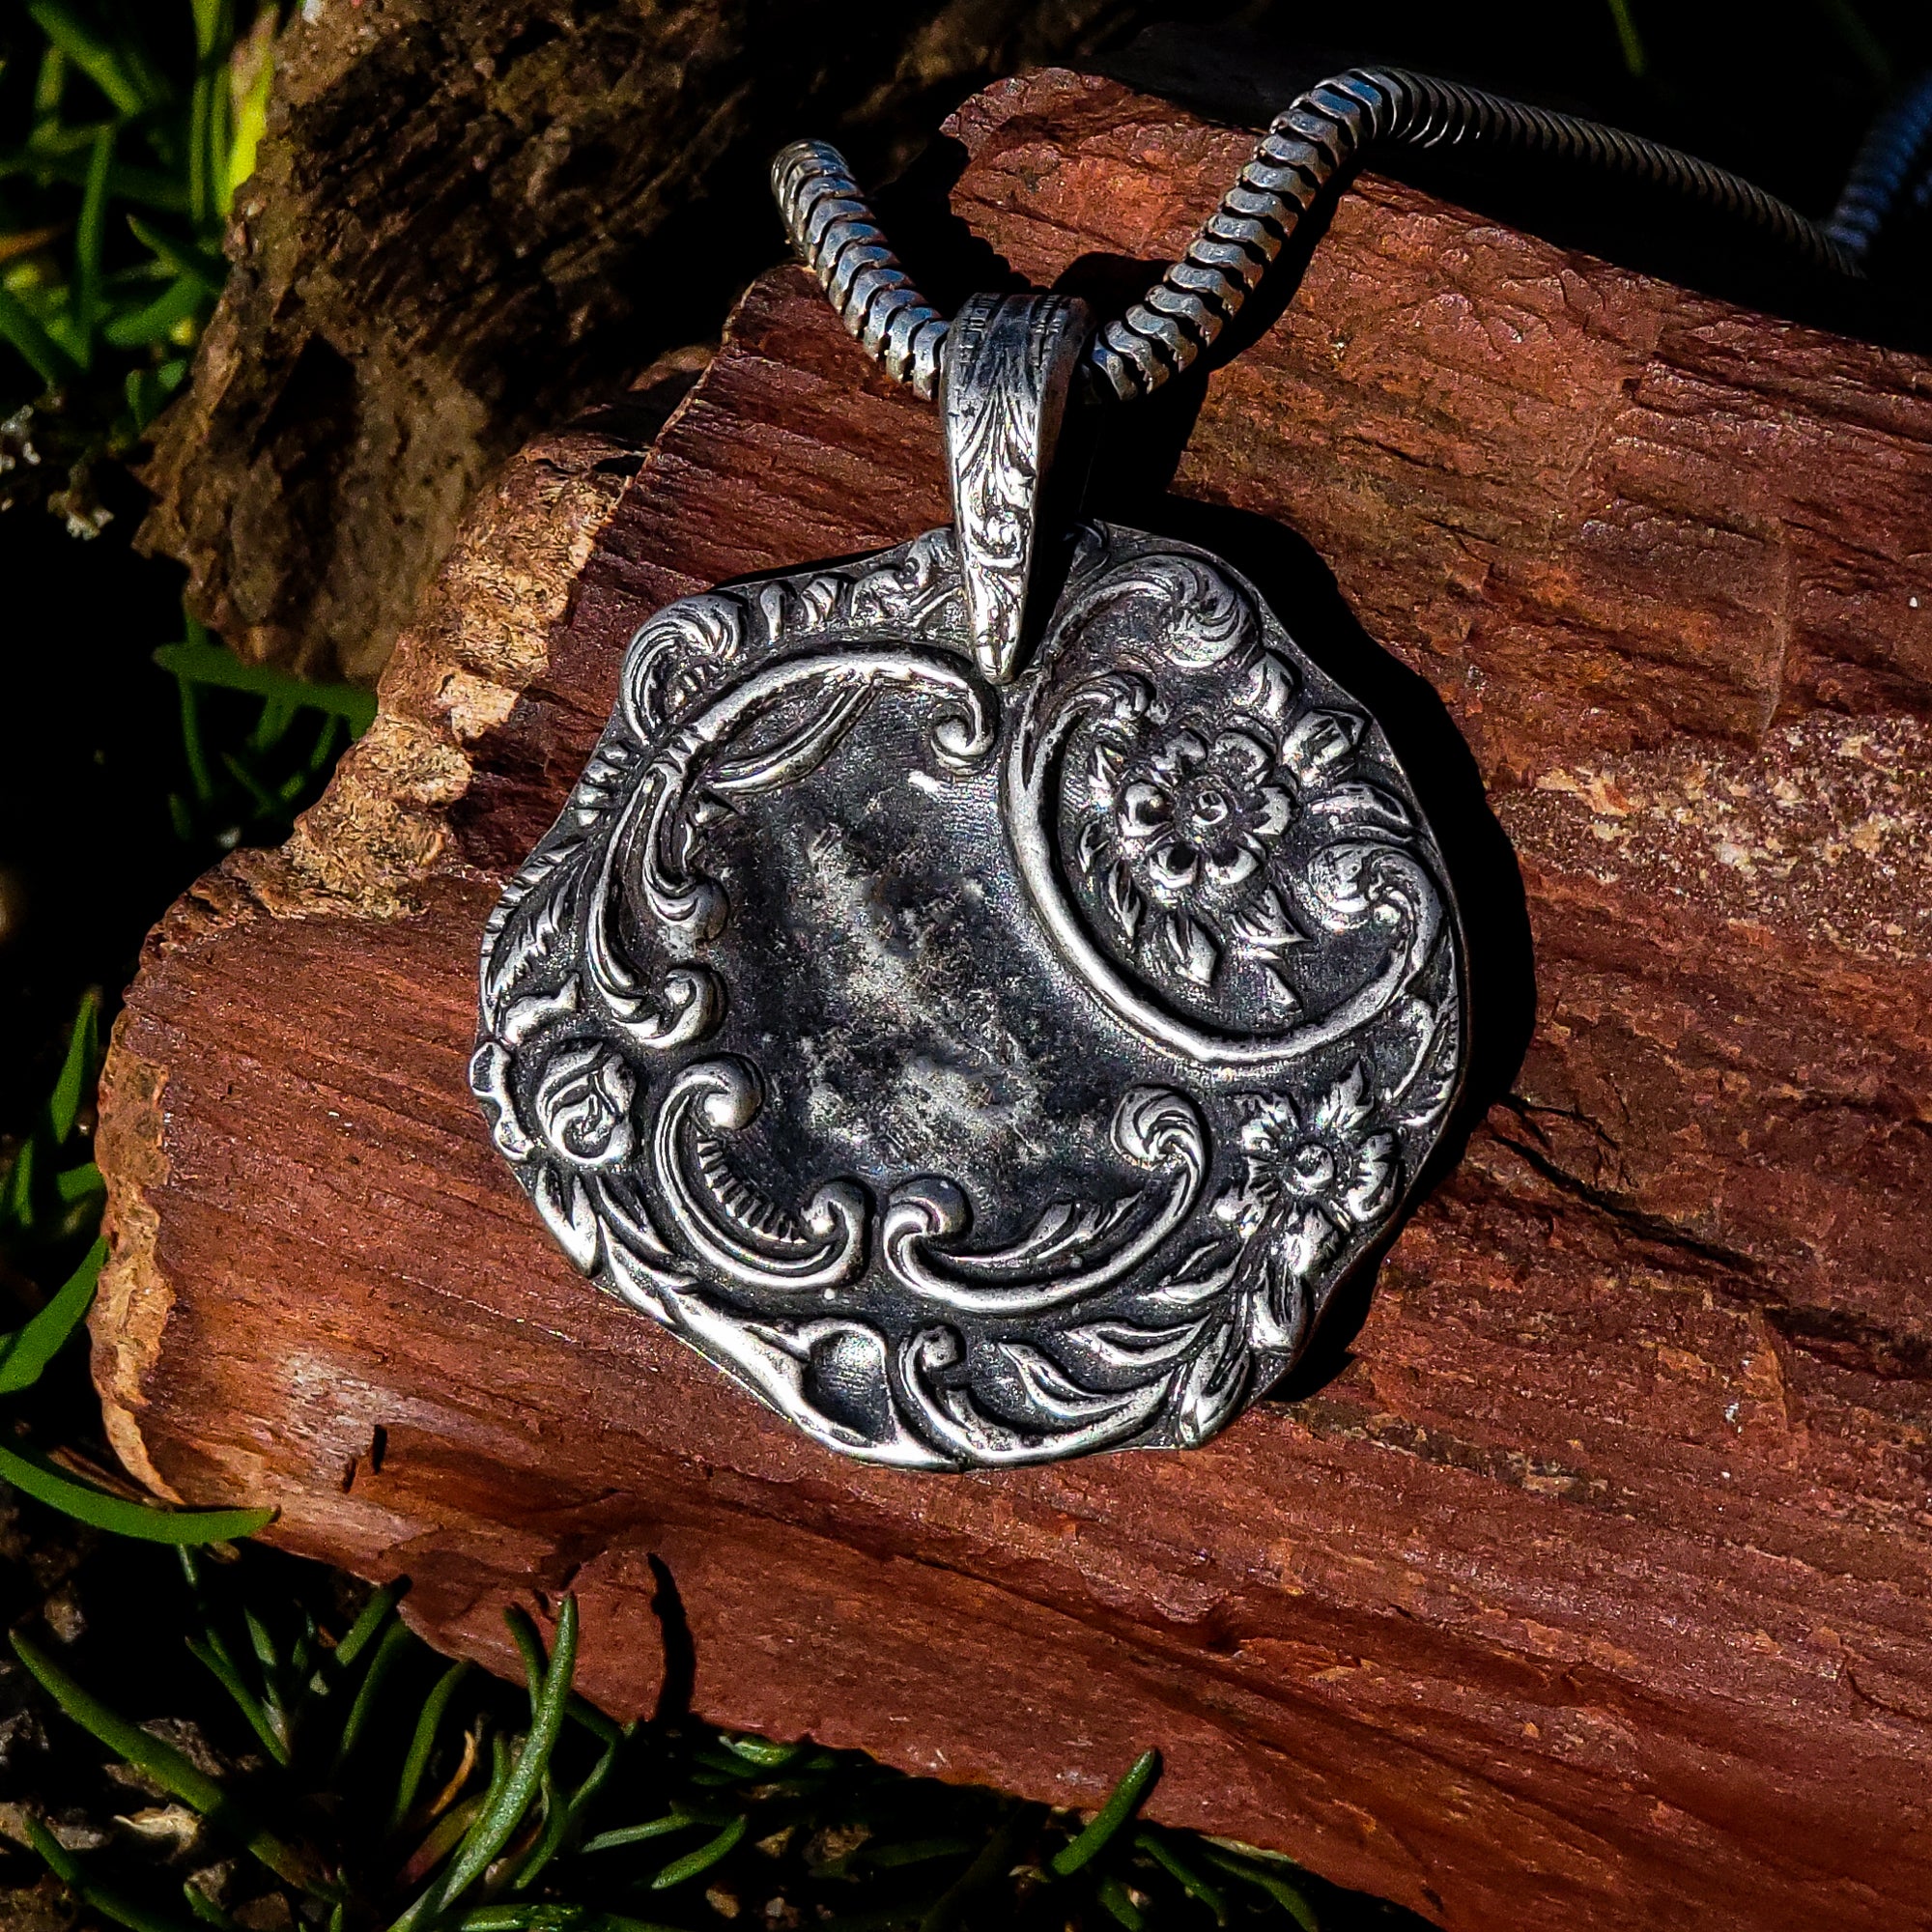 The pendant is shown resting on a piece of wood with tufts of grass visible in the background. The pendant itself is an irregular wreath of flowers and vines made from sterling silver, with a tarnished finish that brings out the details of the design